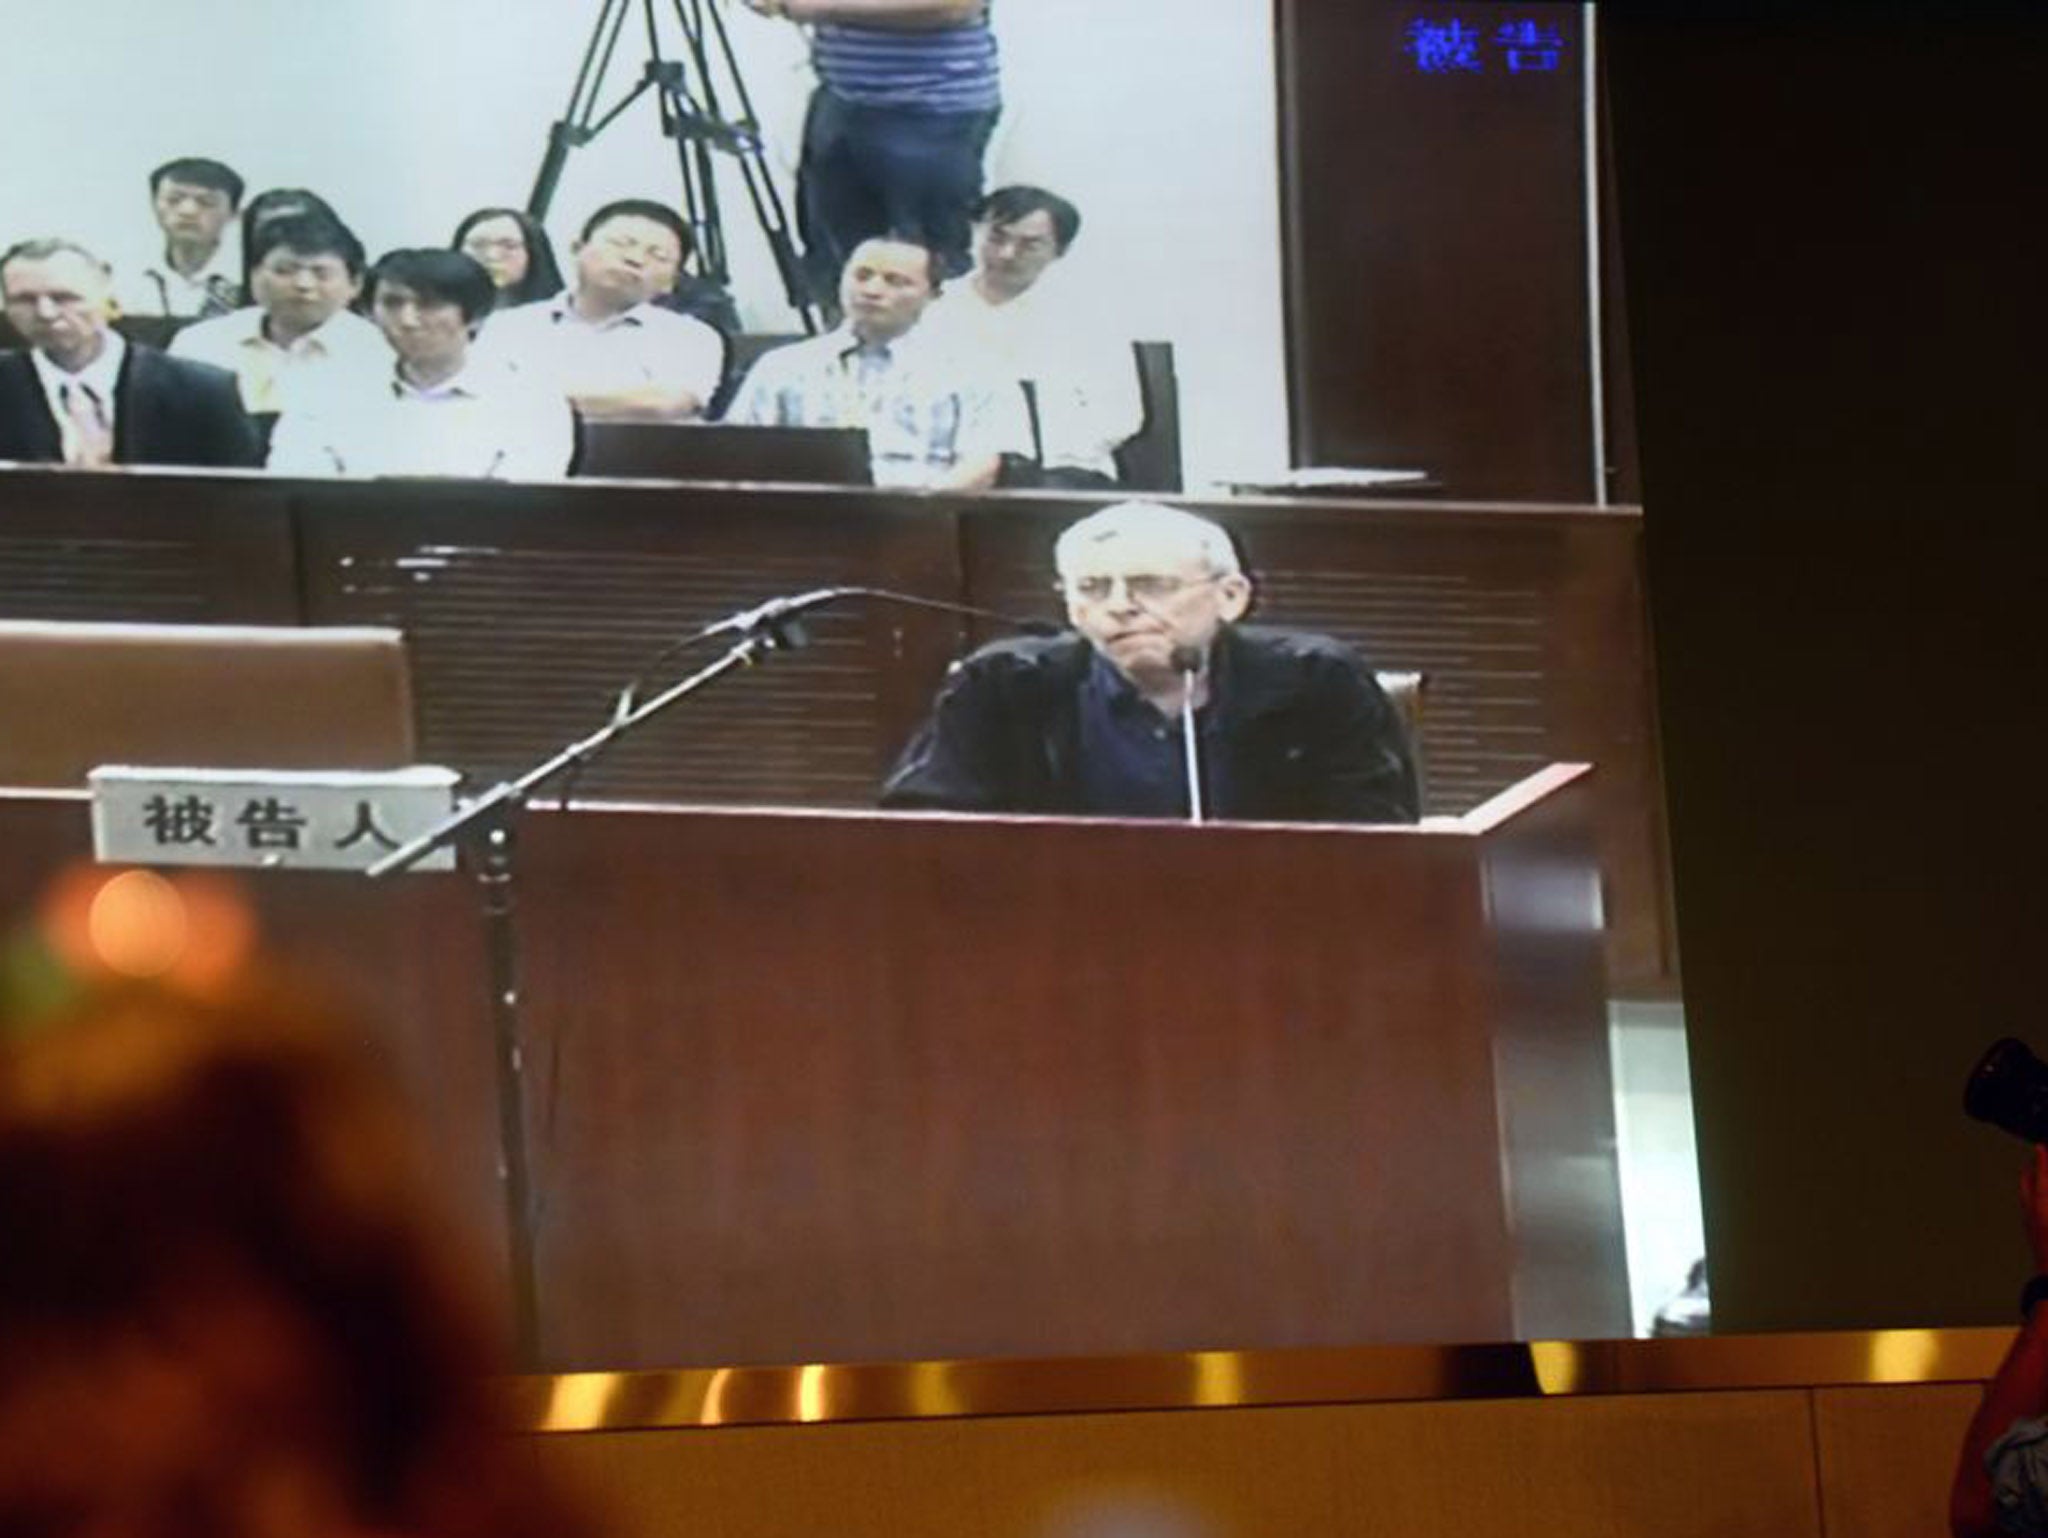 Journalists follow Peter Humphreys' trial in China on a television screen